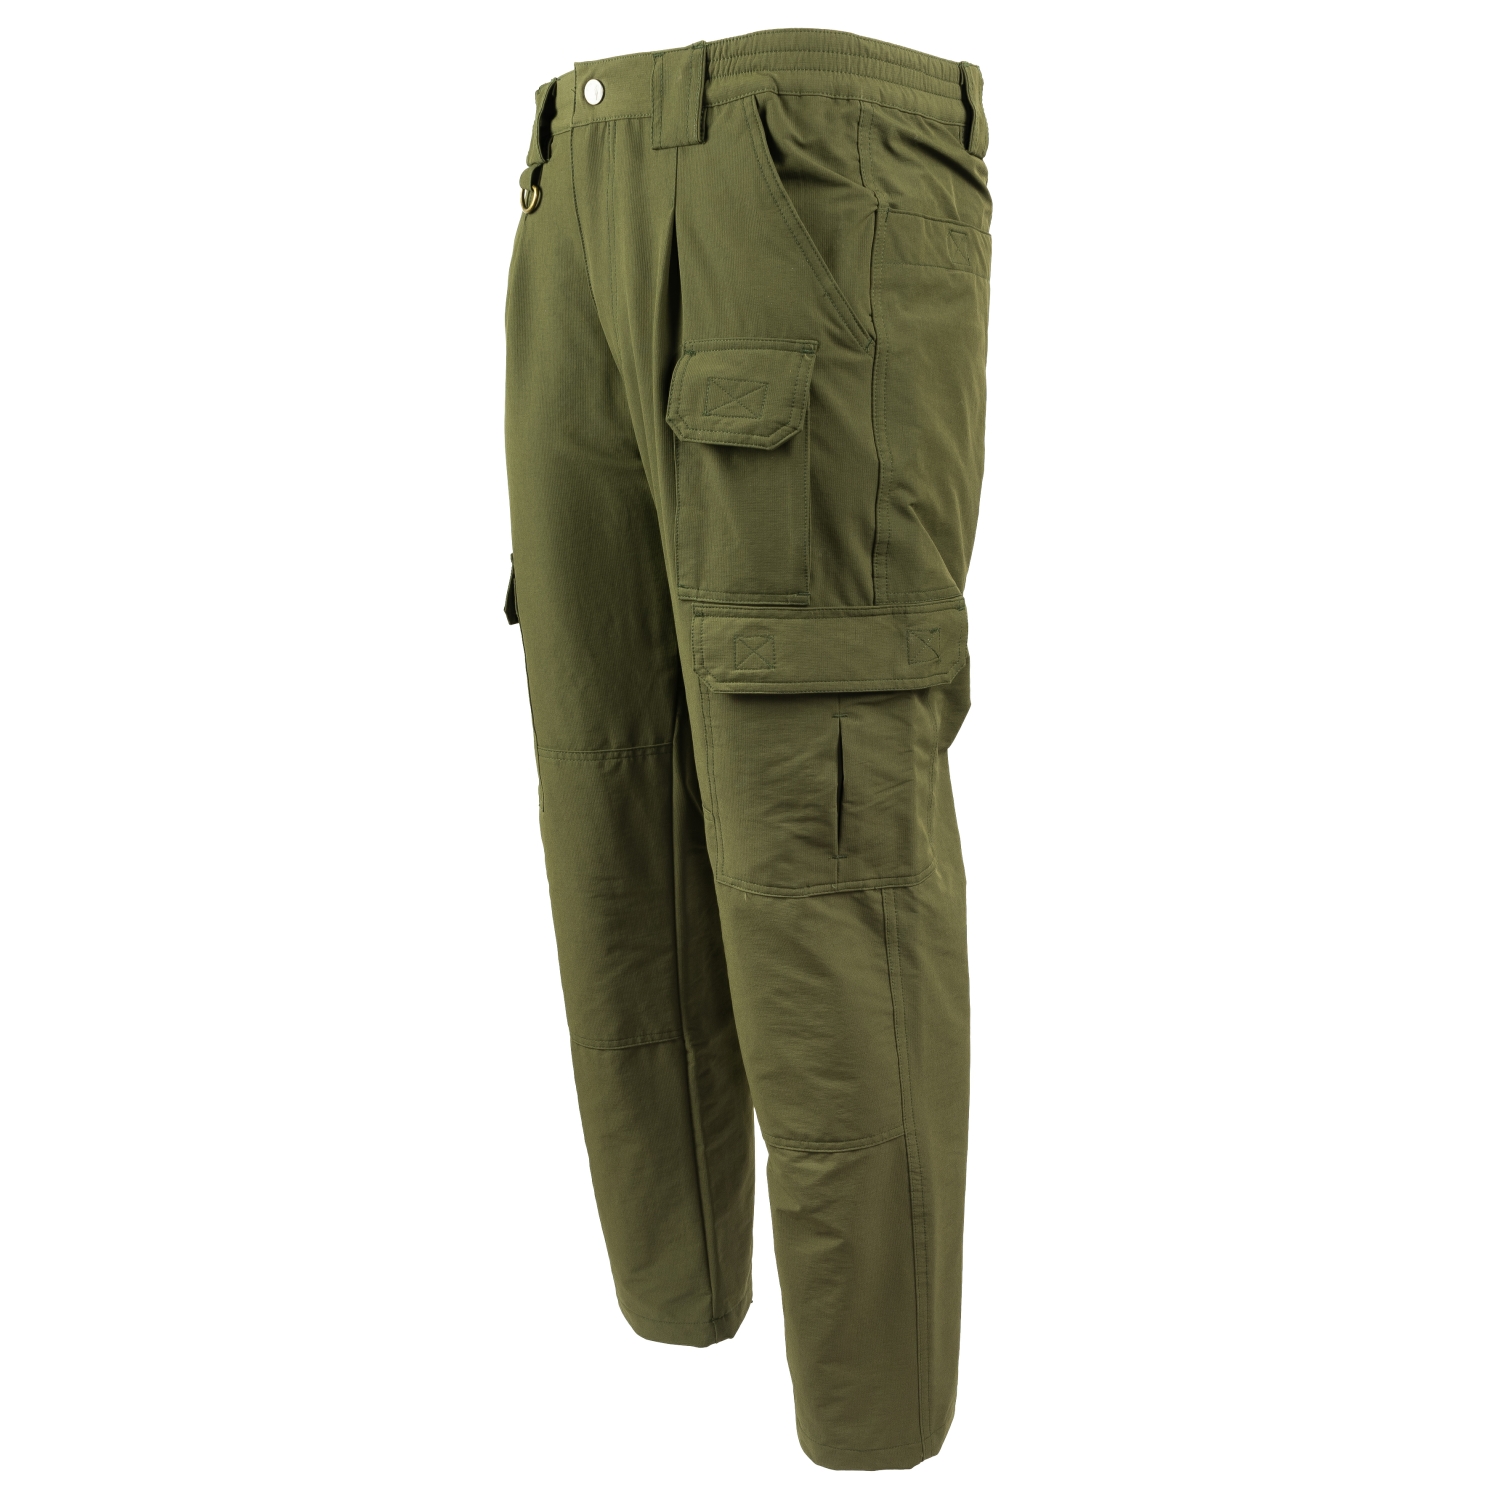 Viper Tactical Stretch Pants Airsoft Combats Military Trousers ...